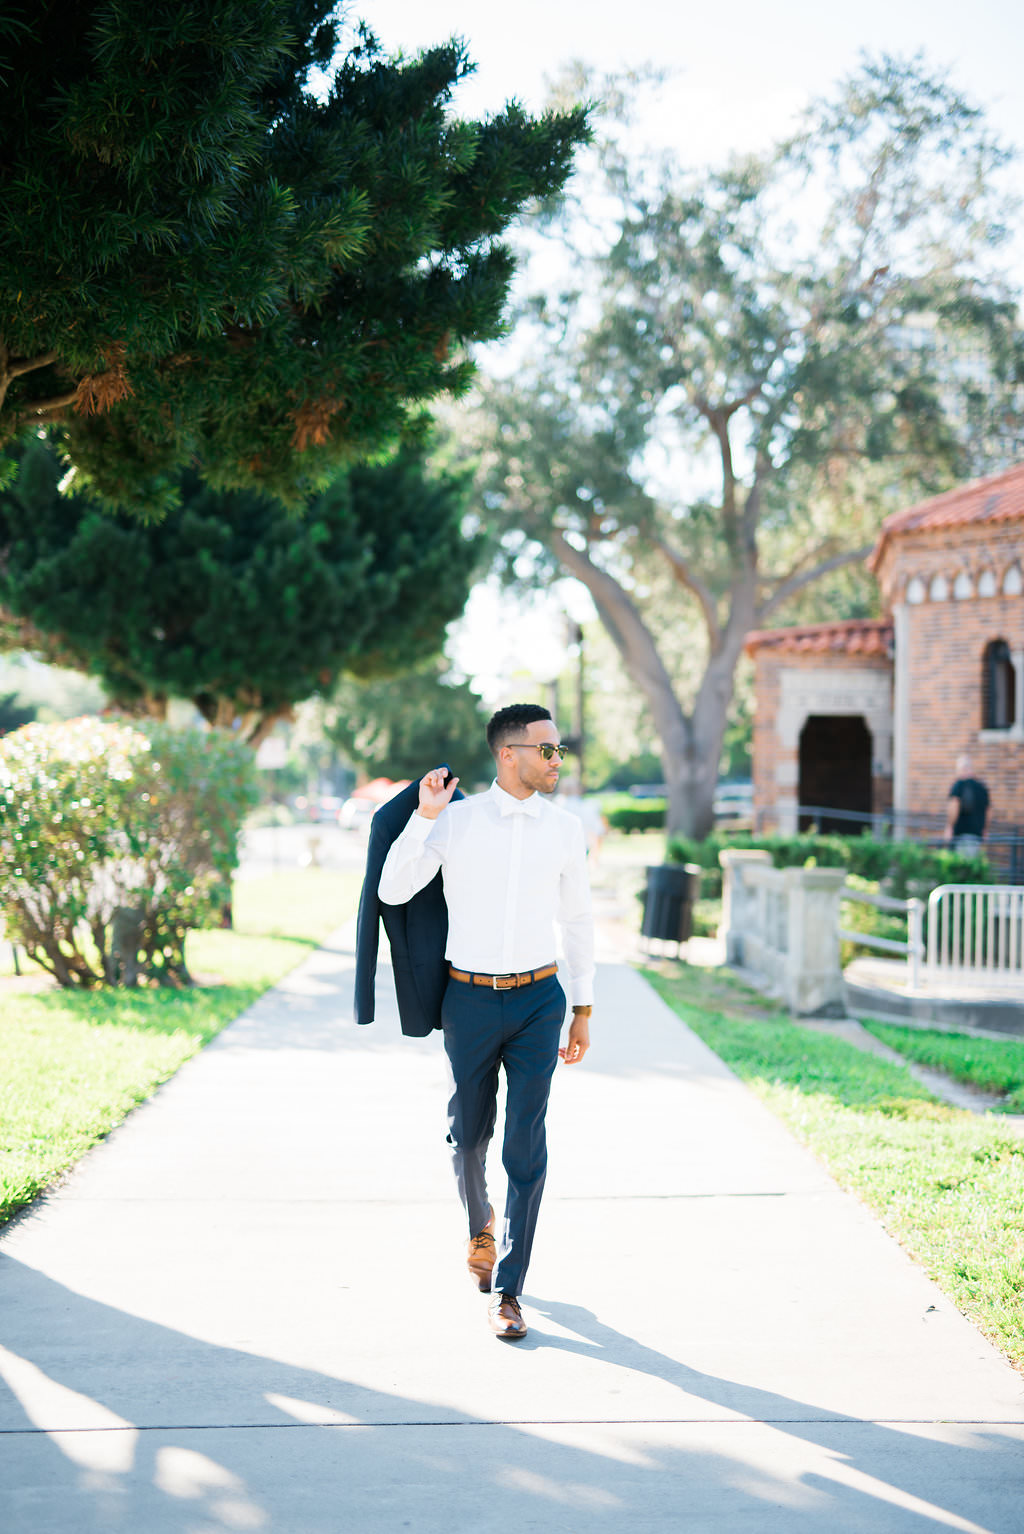 Outdoor Groom Portrait wearing White Suit Shirt and White Bowtie Holding Navy Blue Tuxedo Jacket | Downtown St. Pete Wedding Photographer Kera Photography